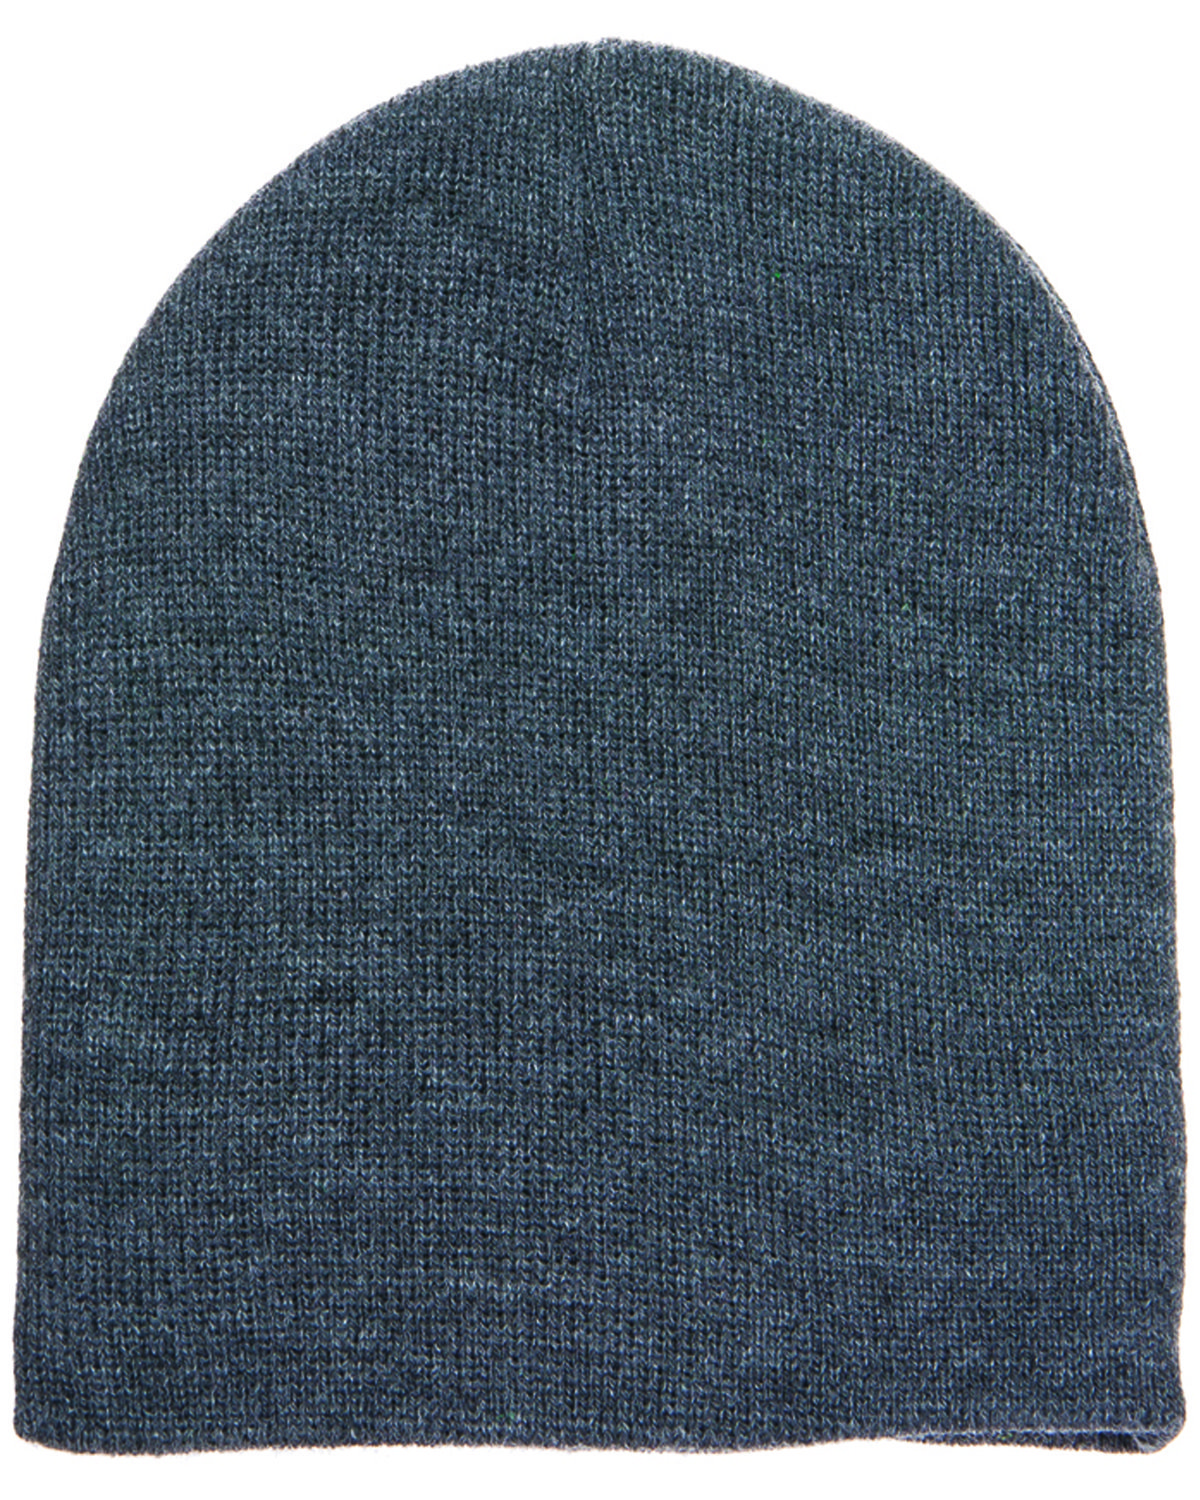 Yupoong Adult Knit Beanie alphabroder 